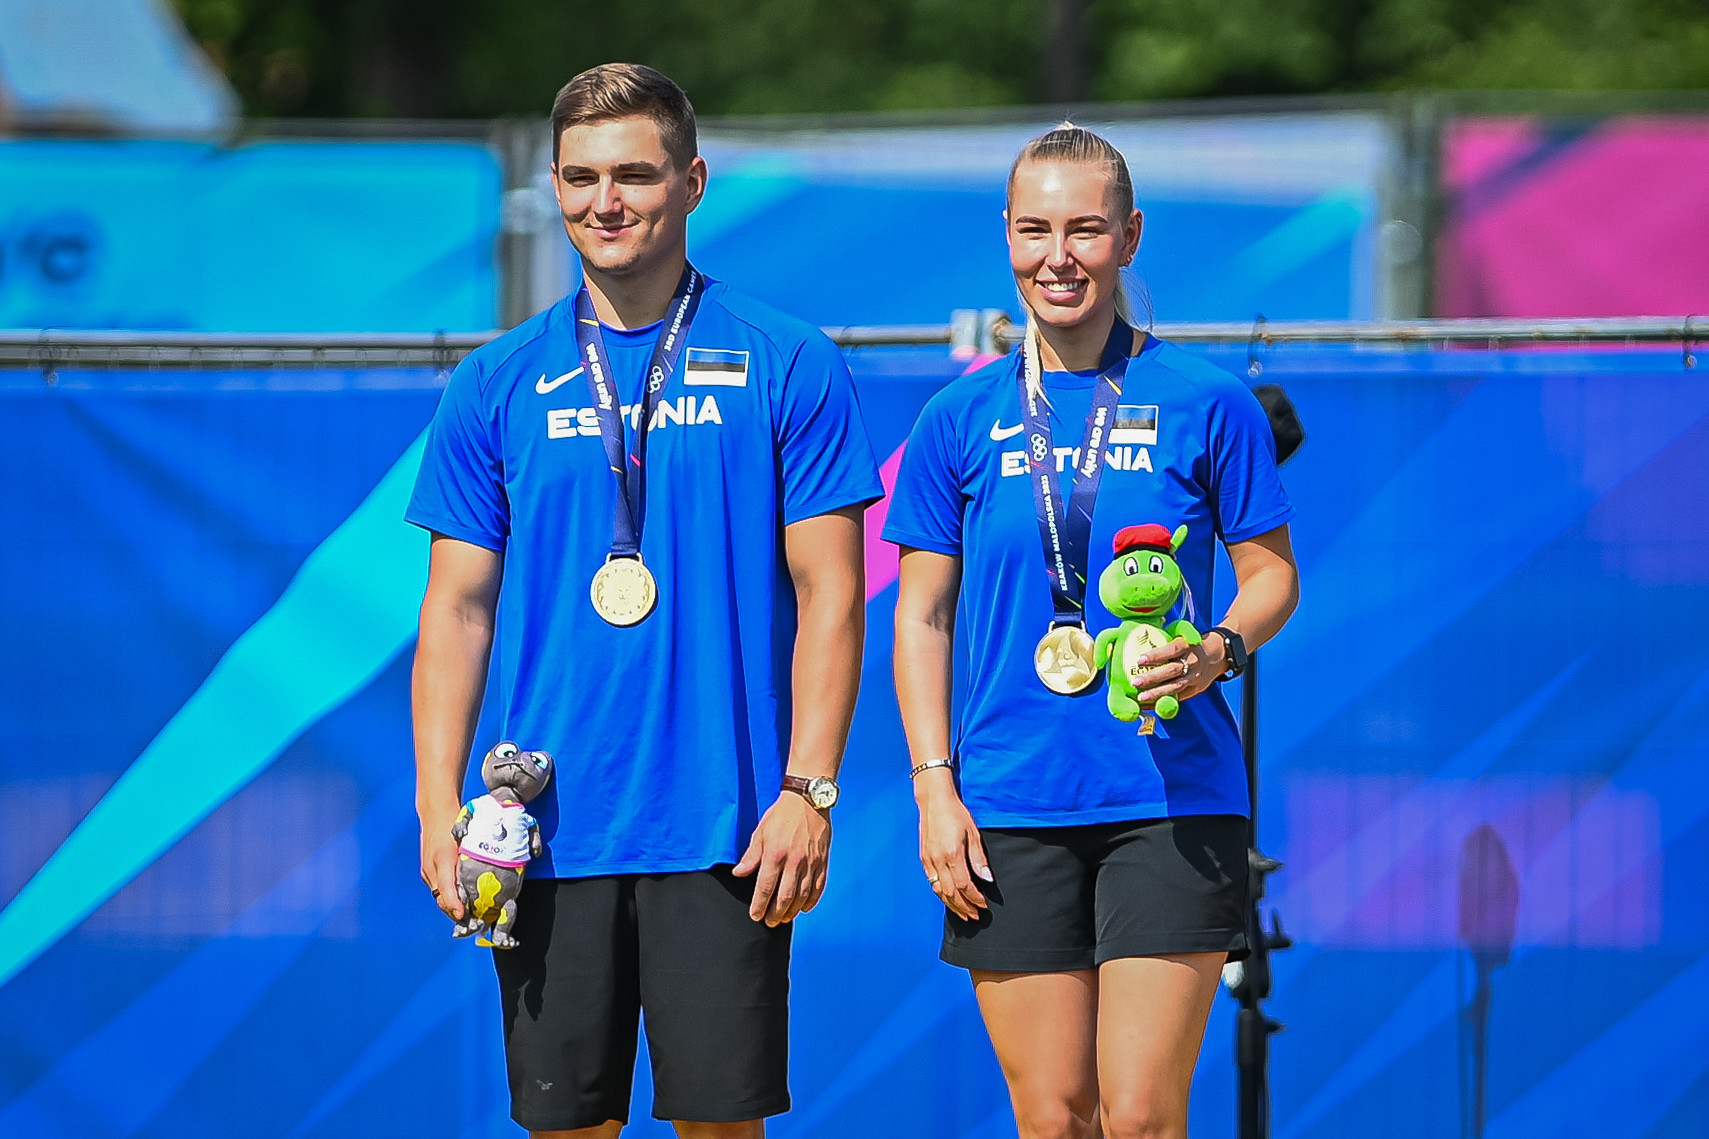 Estonia's Chef de Mission says European Games medals "highly commendable"